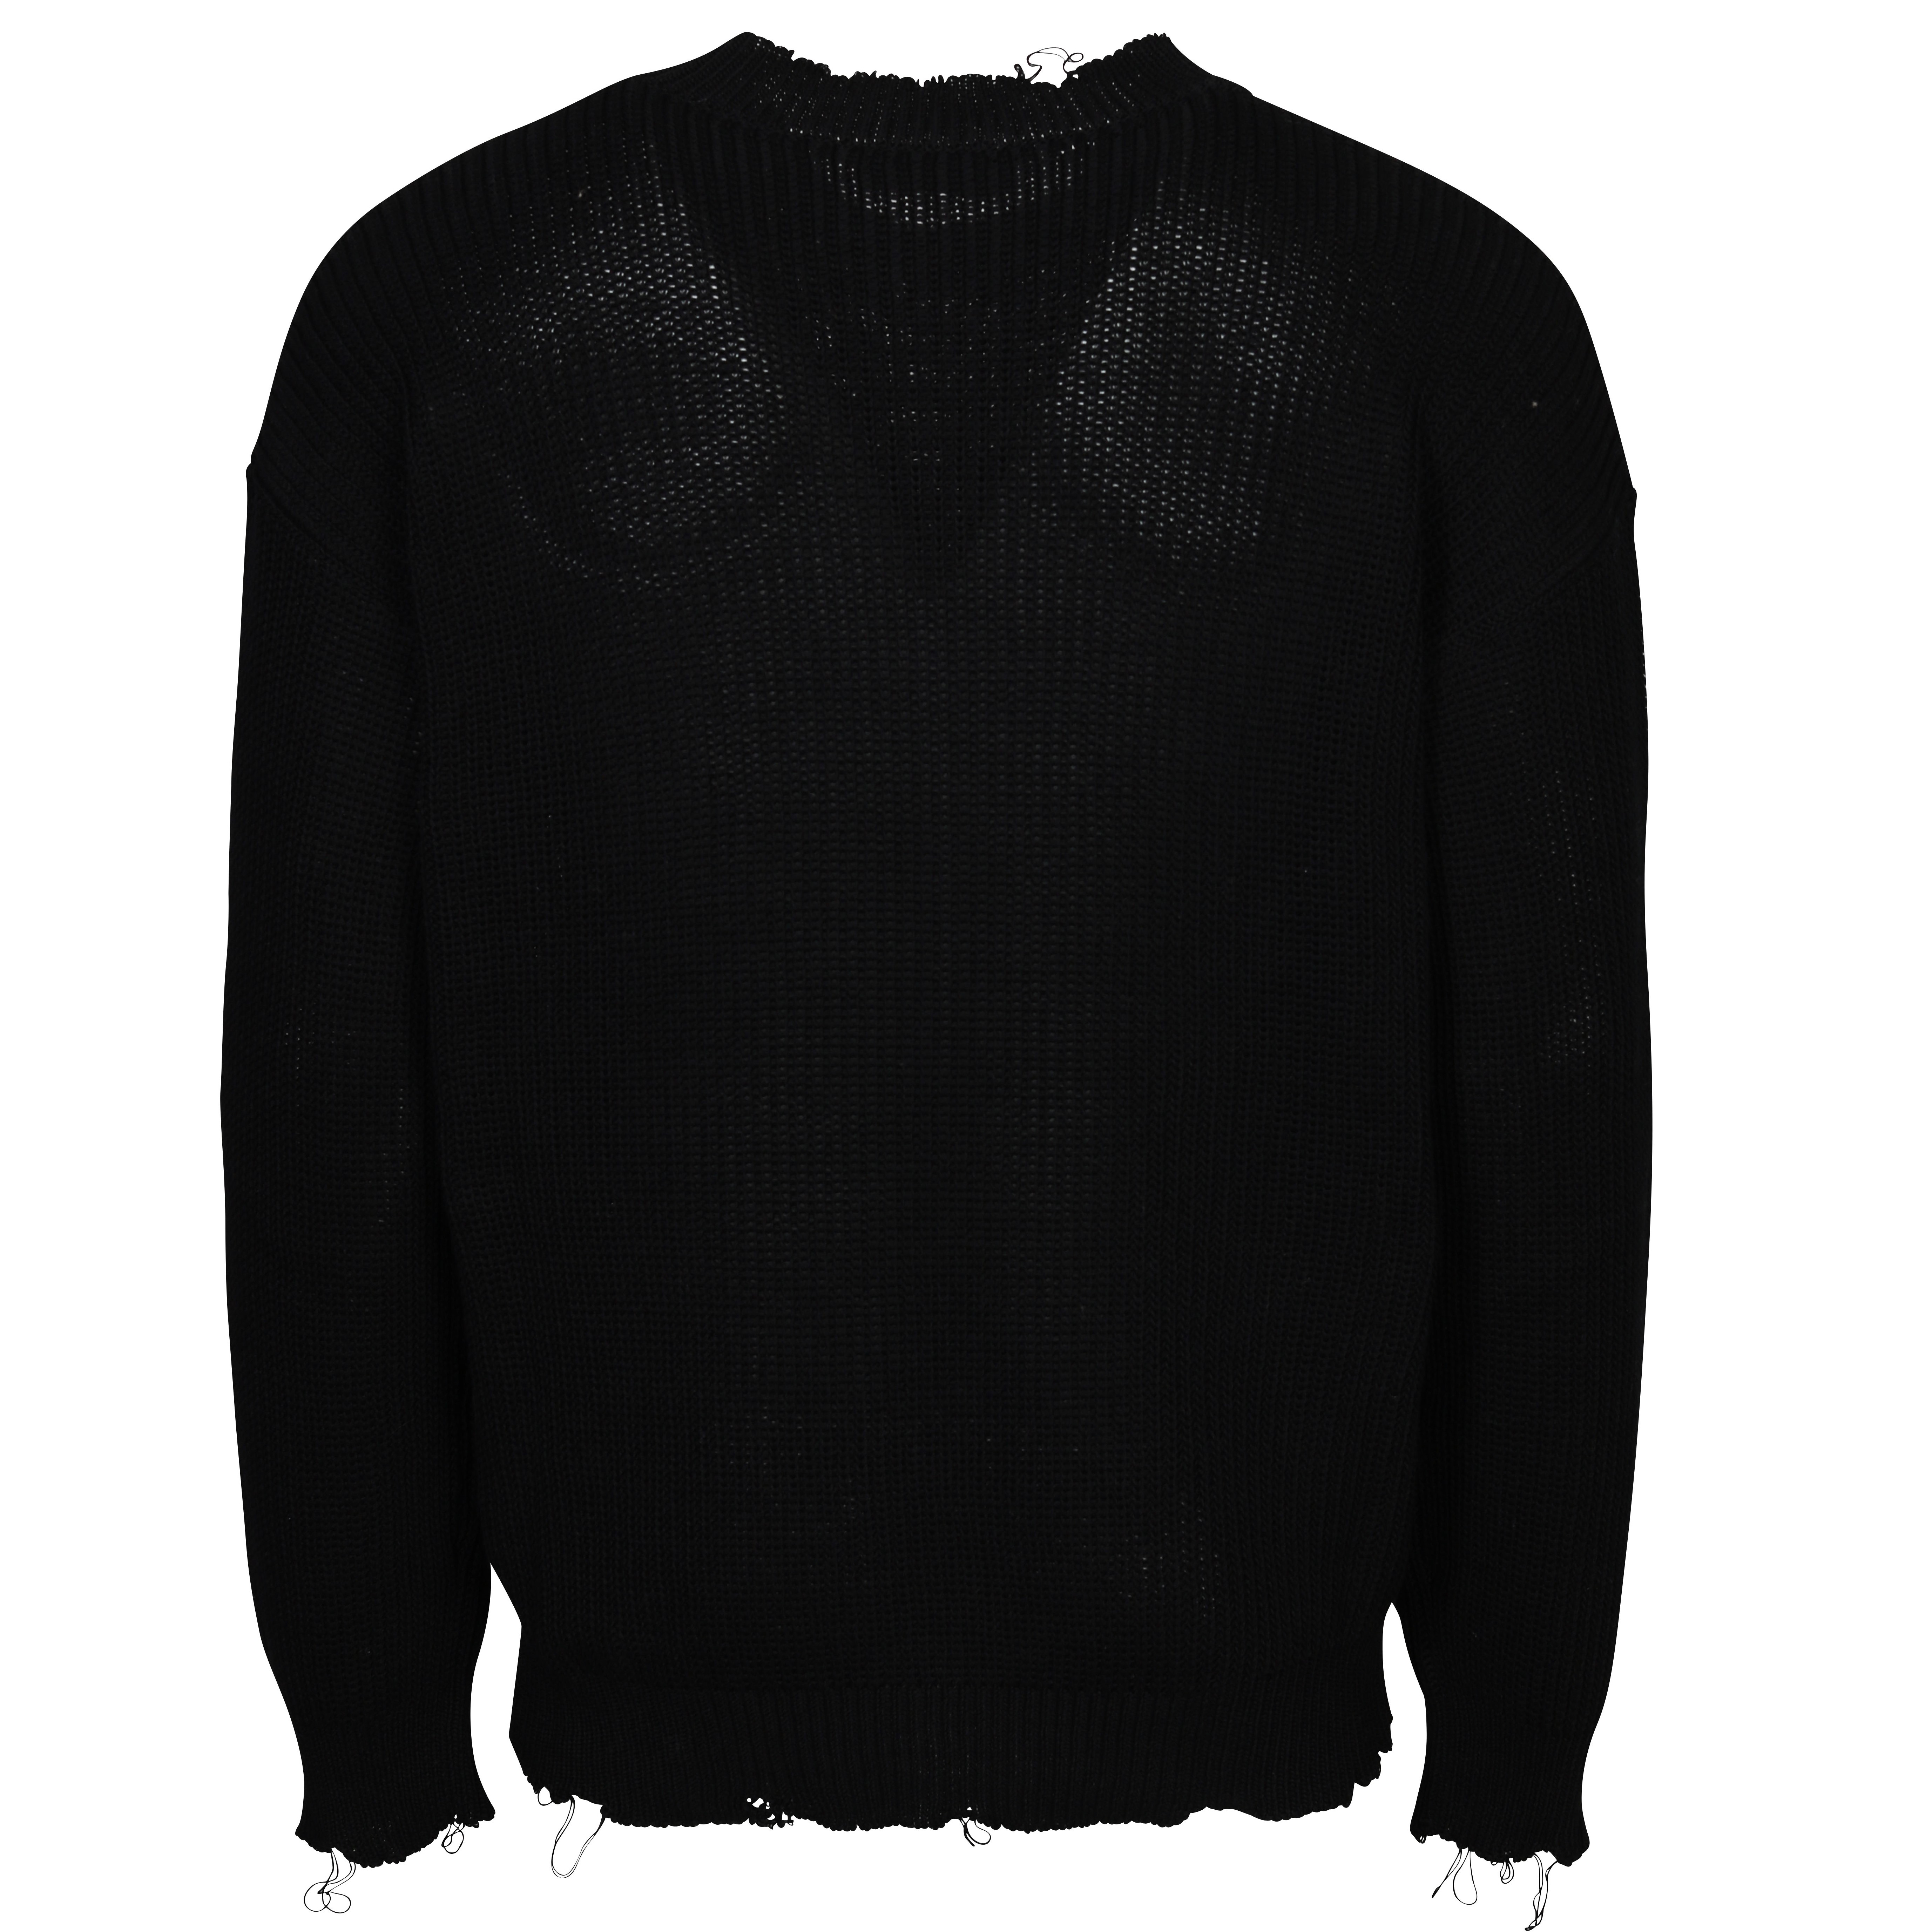 Dsquared Dsquared2 Knit Sweater in Black